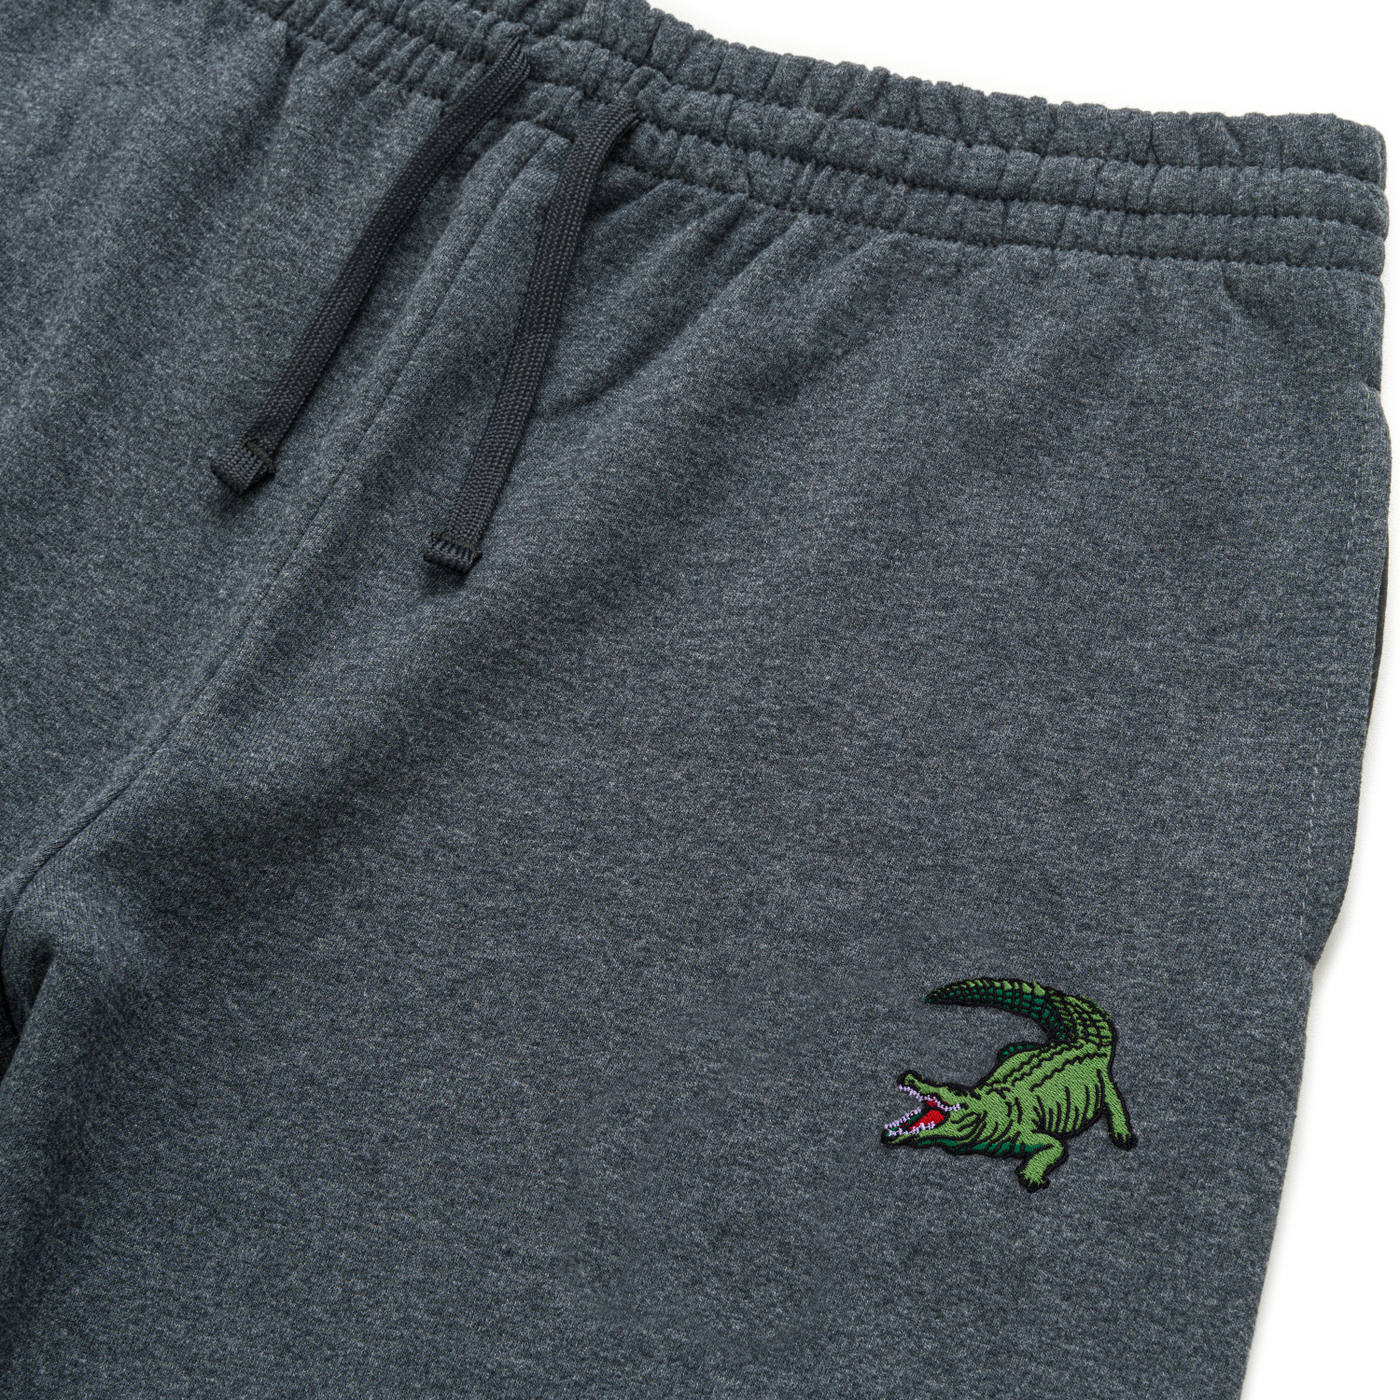 Bobby's Planet Unisex Embroidered Saltwater Crocodile Joggers from Australia Down Under Animals Collection in Black Heather Color#color_black-heather